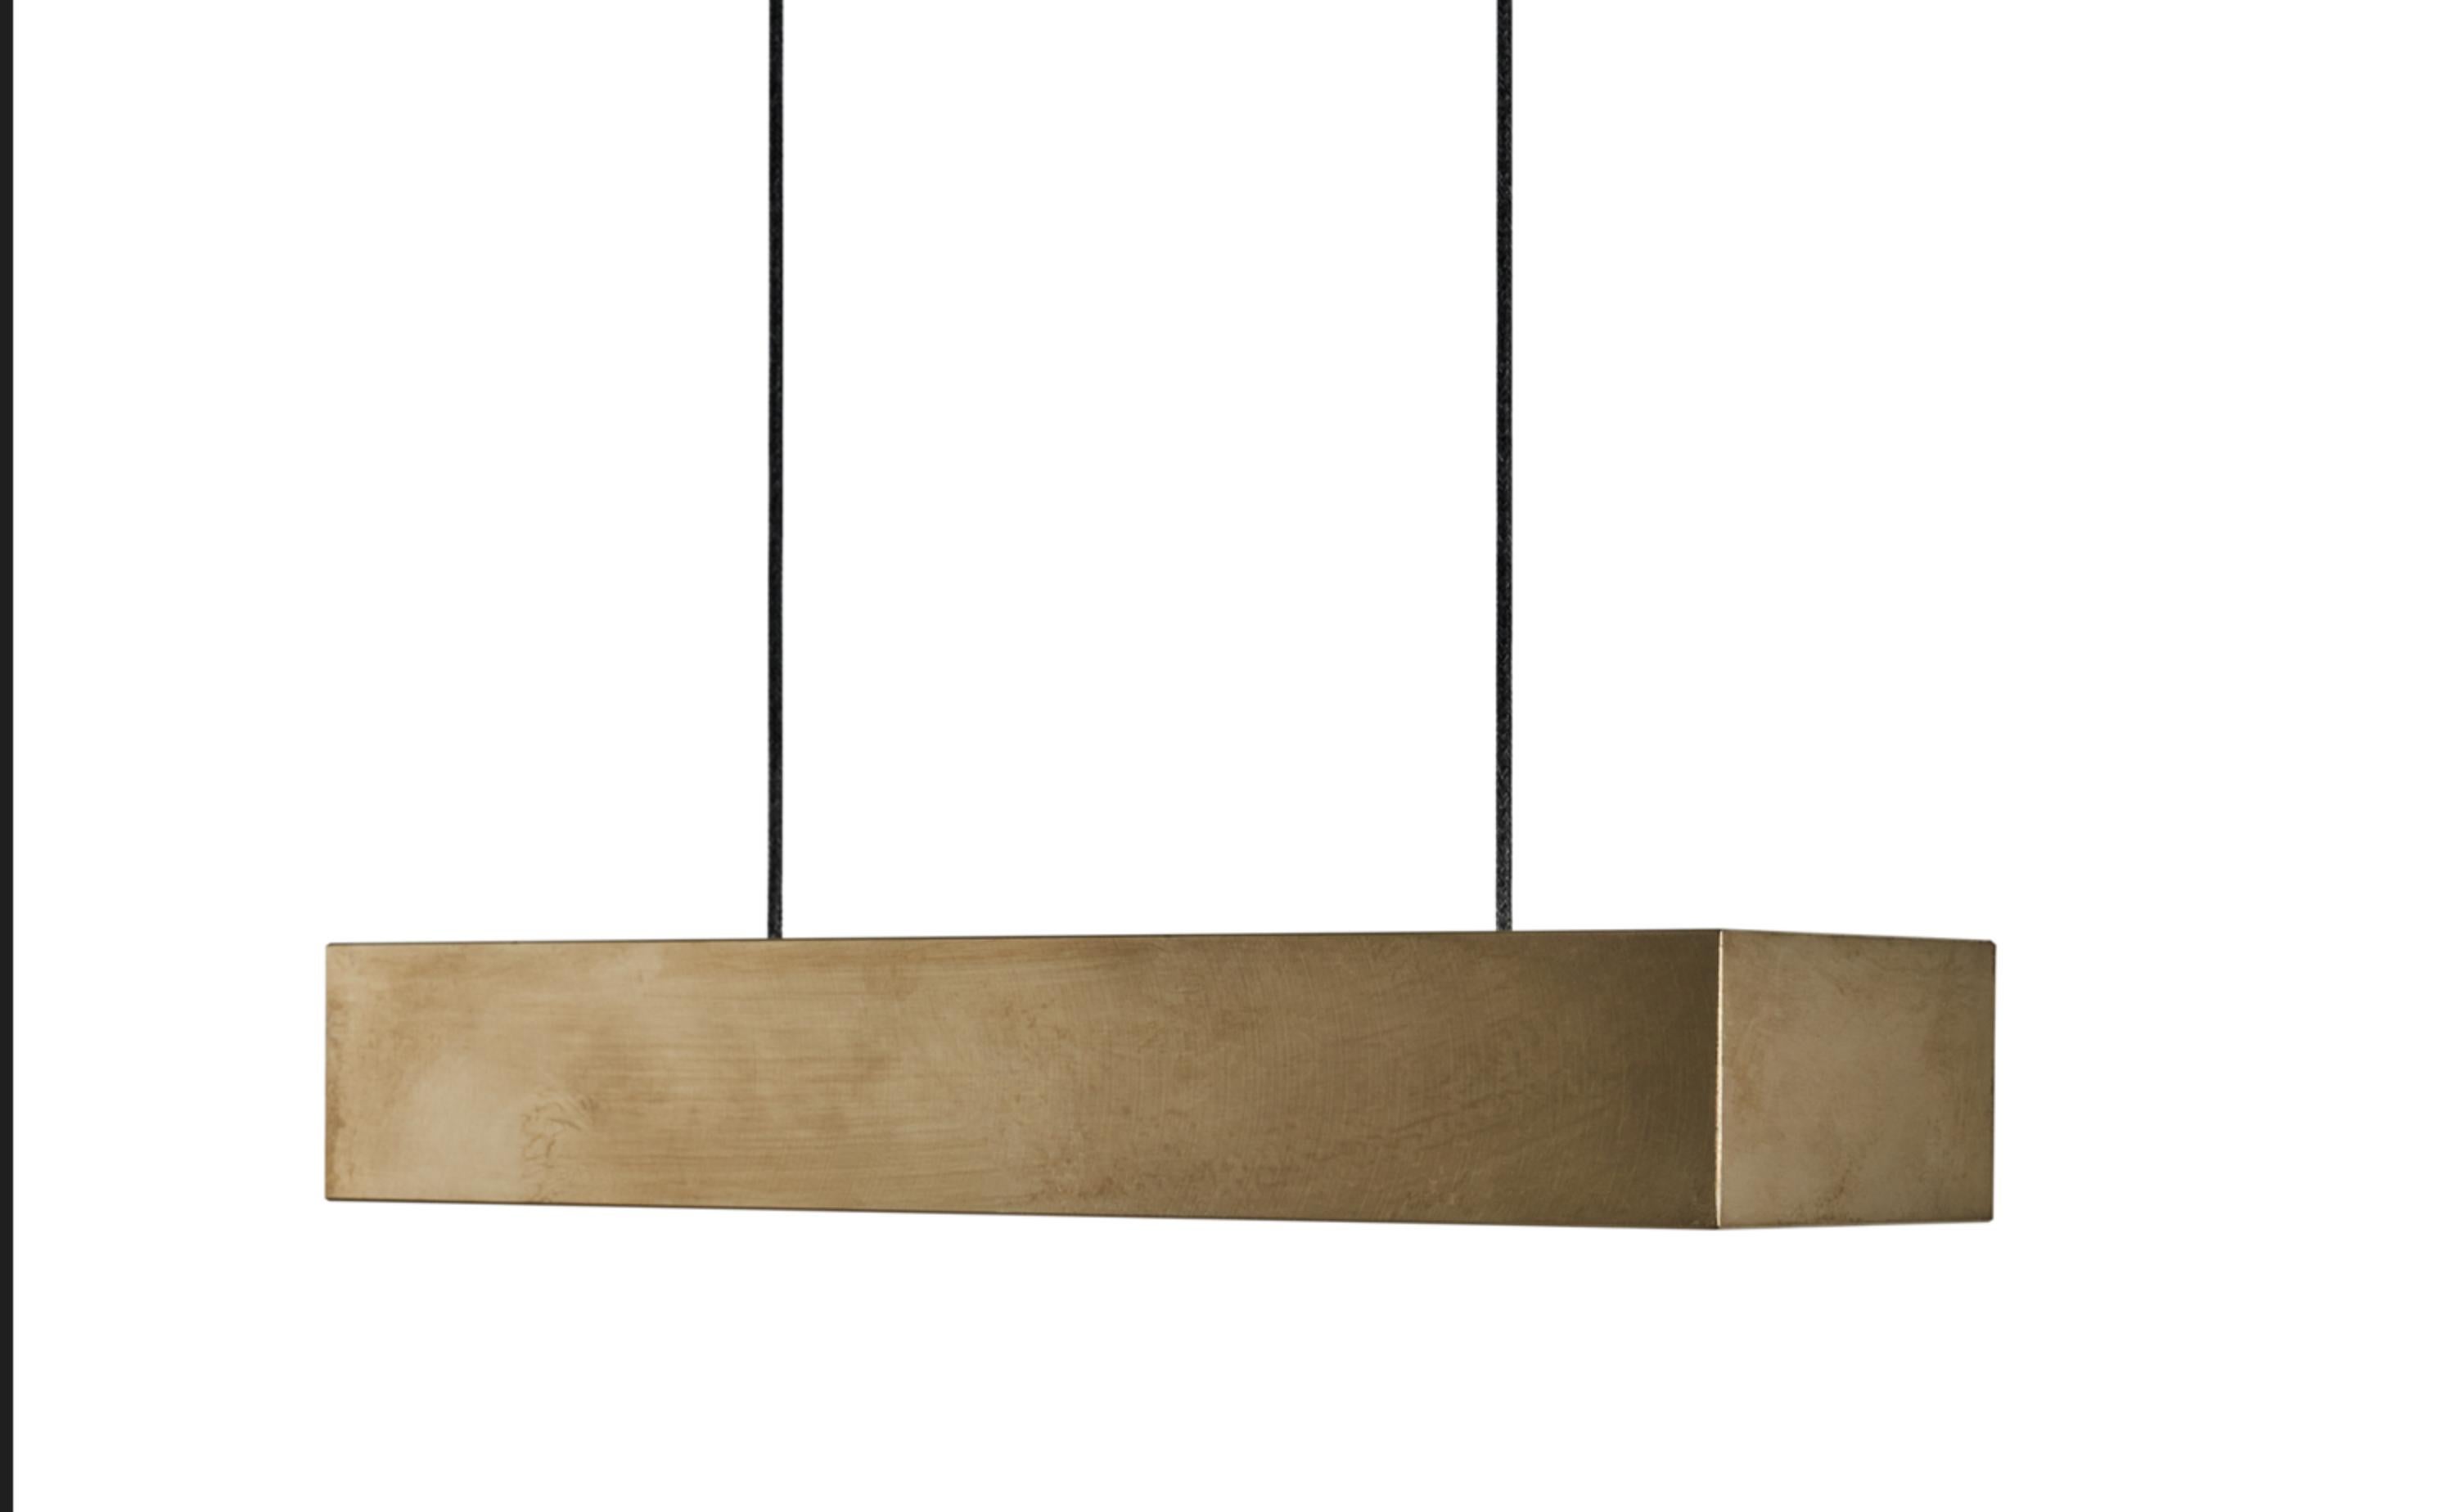 Brass Oblivion suspended light by Lexavala
Dimensions: W 18 x D 6 x H 3 cm 
Materials: Brass

Ultimate final touch in every lighting design. The brightest little detail to your home. Outstanding craftmanship combined.

Hello! My name is